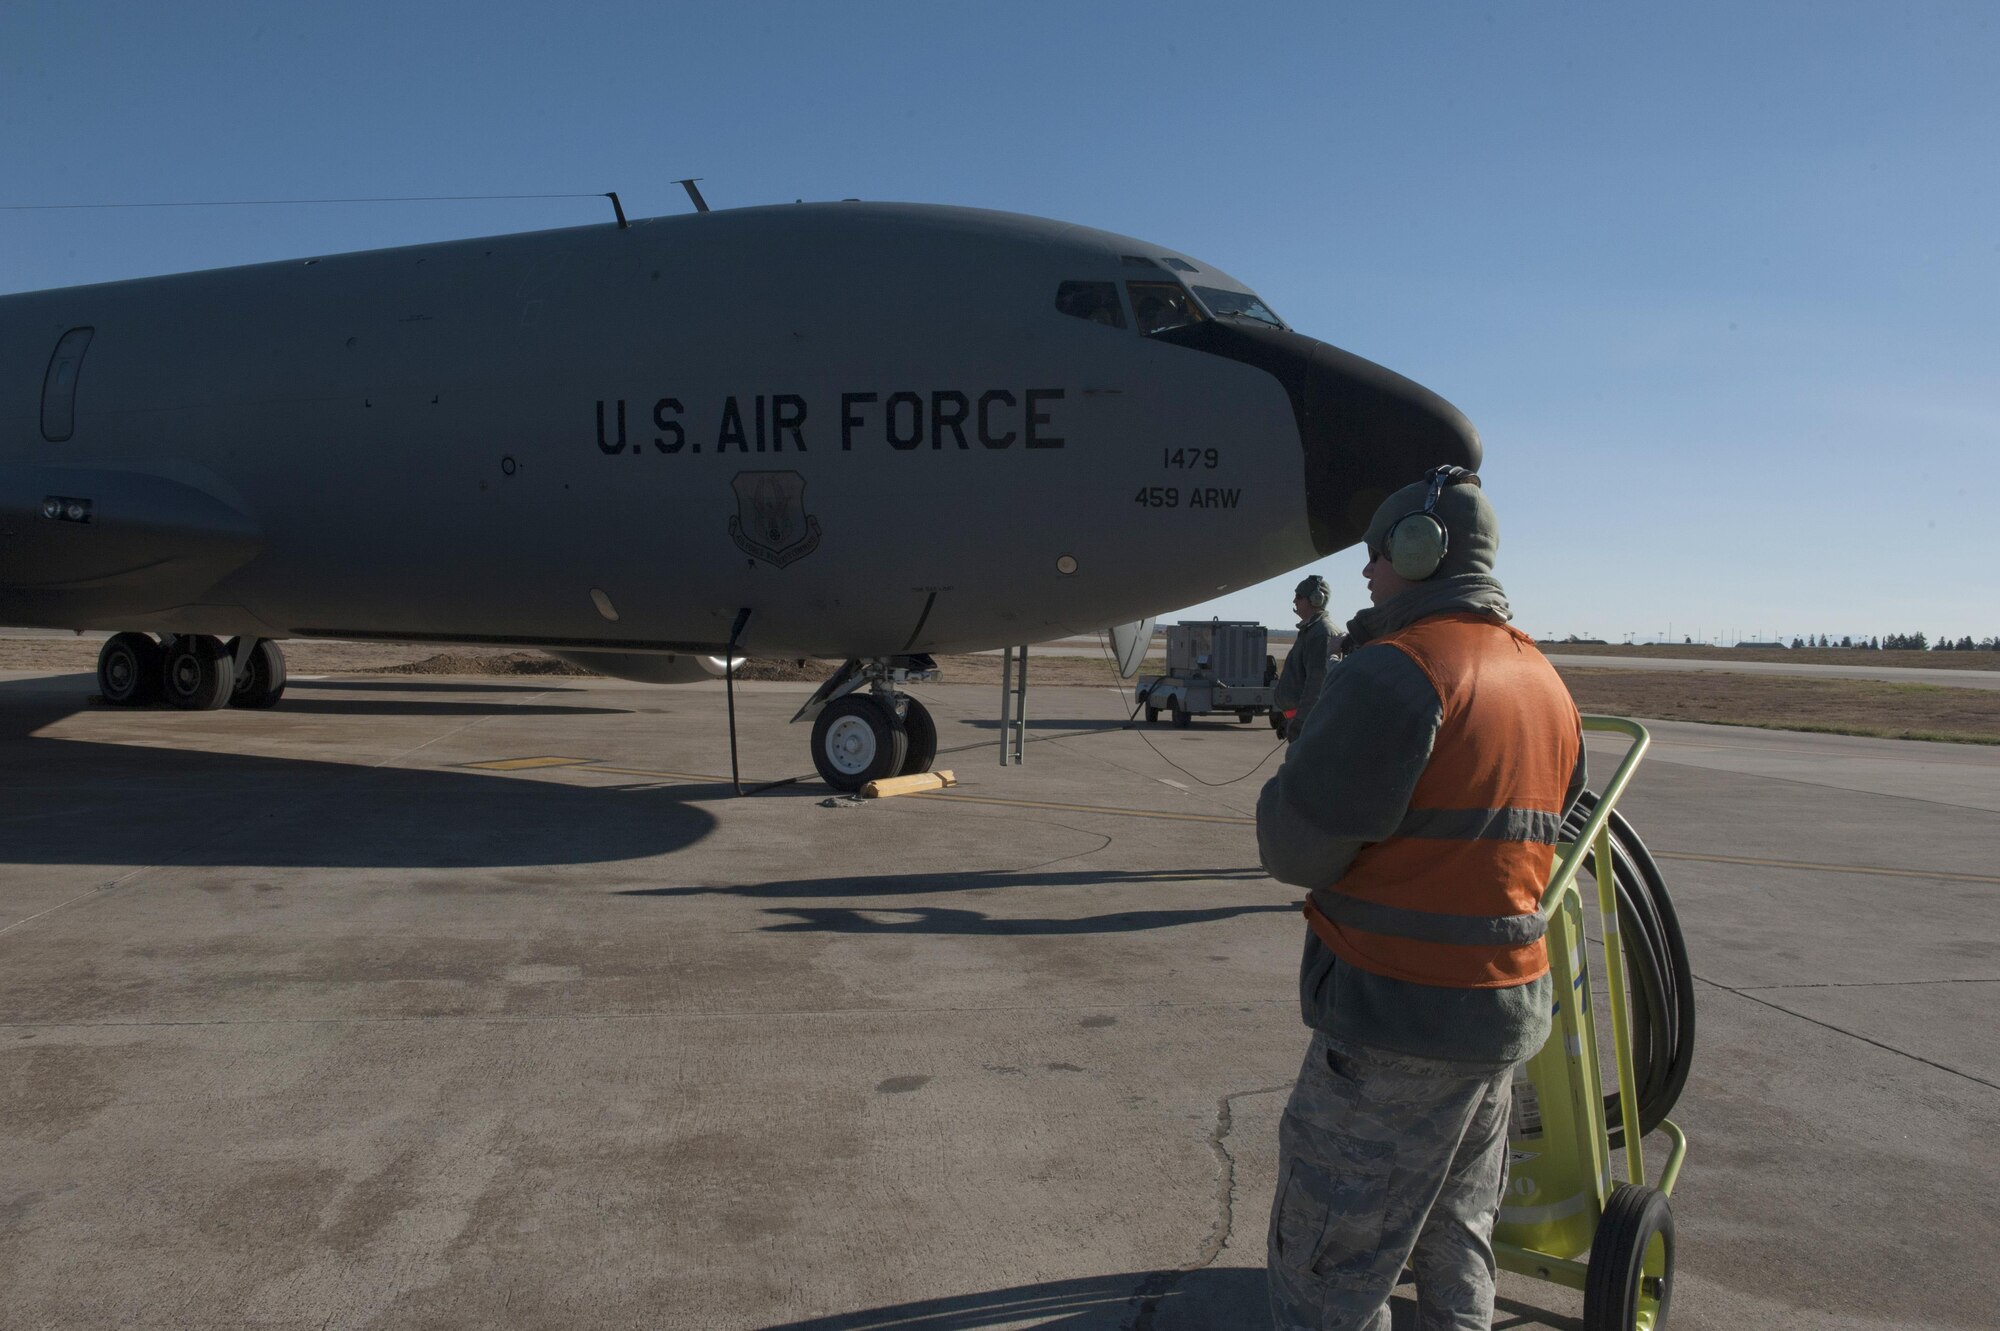 U.S. Air Force Staff Sgt. Brian (front) and Staff Sgt. Houston, 447th Expeditionary Aircraft Maintenance Squadron crew chiefs, perform initial preflight checks on a KC-135 Stratotanker Nov. 2, 2016, at Incirlik Air Base, Turkey.  Preflight checks allow for air and ground crews to ensure there are no issues with the aircraft before flight. (U.S. Air Force photo by Staff Sgt. Jack Sanders)